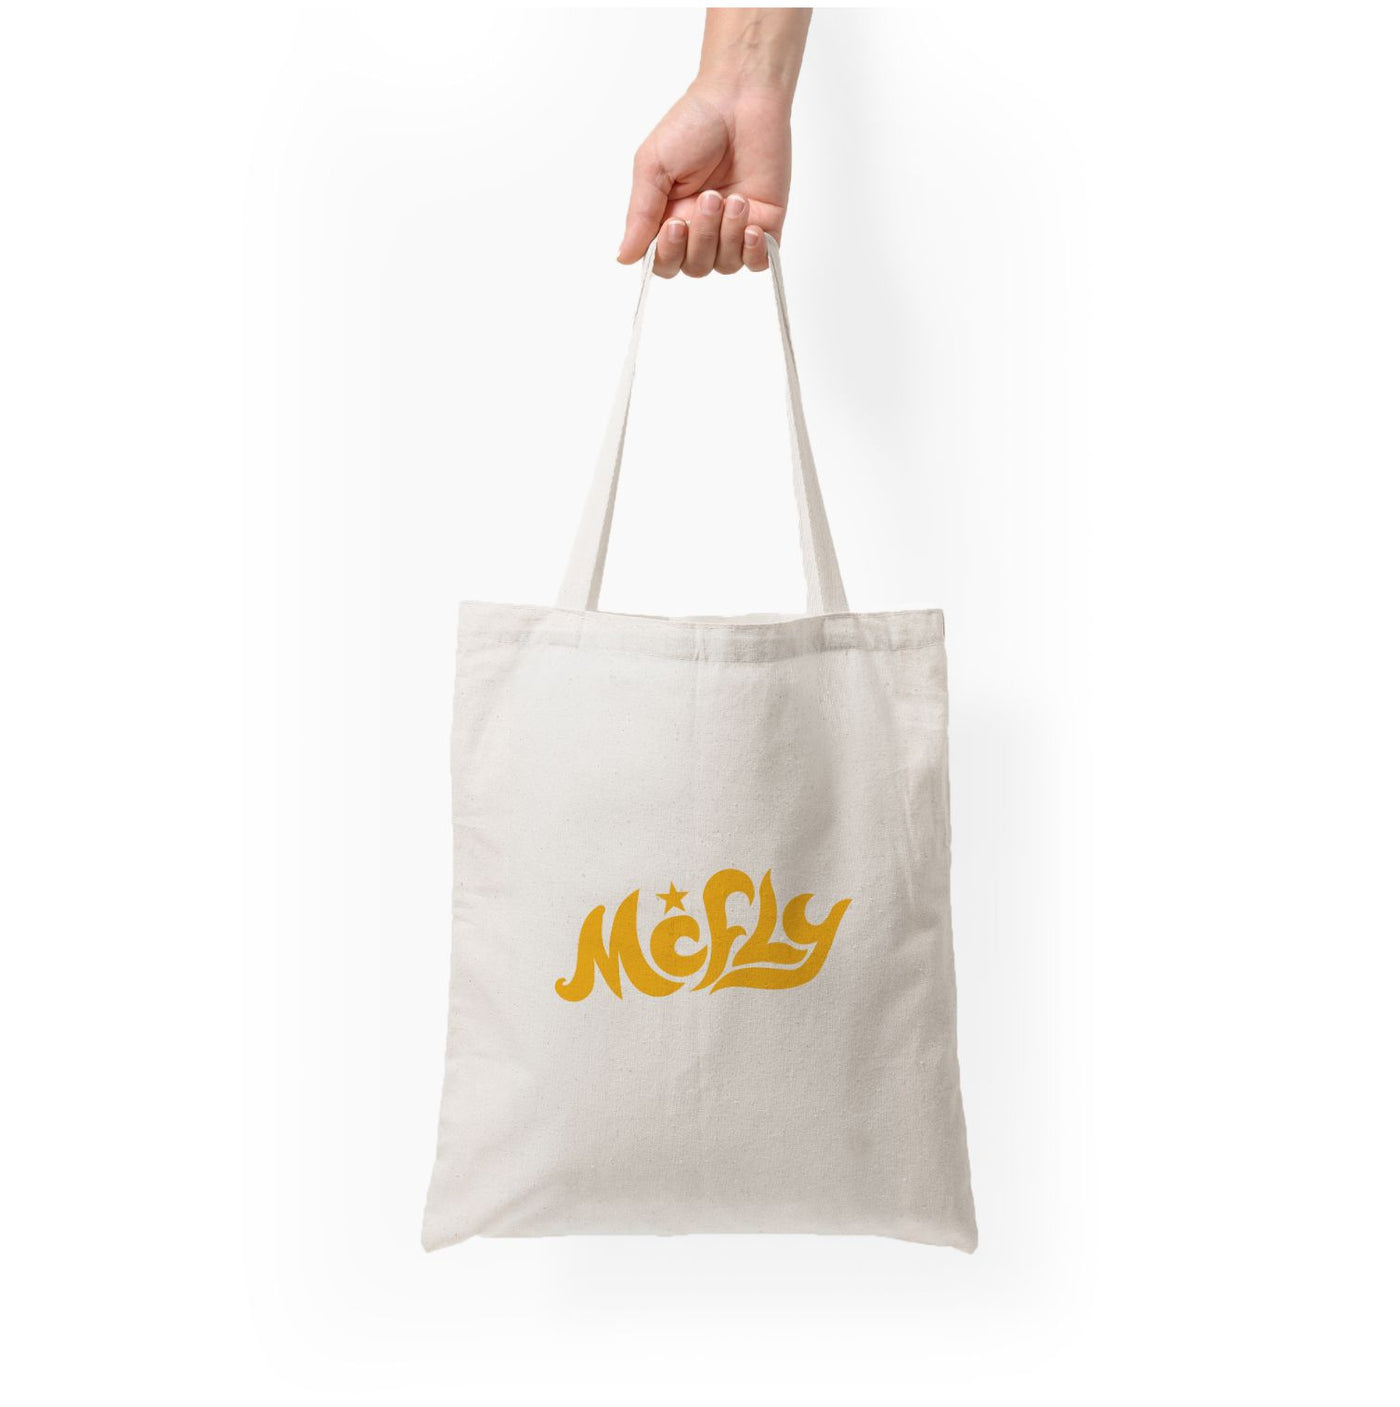 Star - McFly Tote Bag